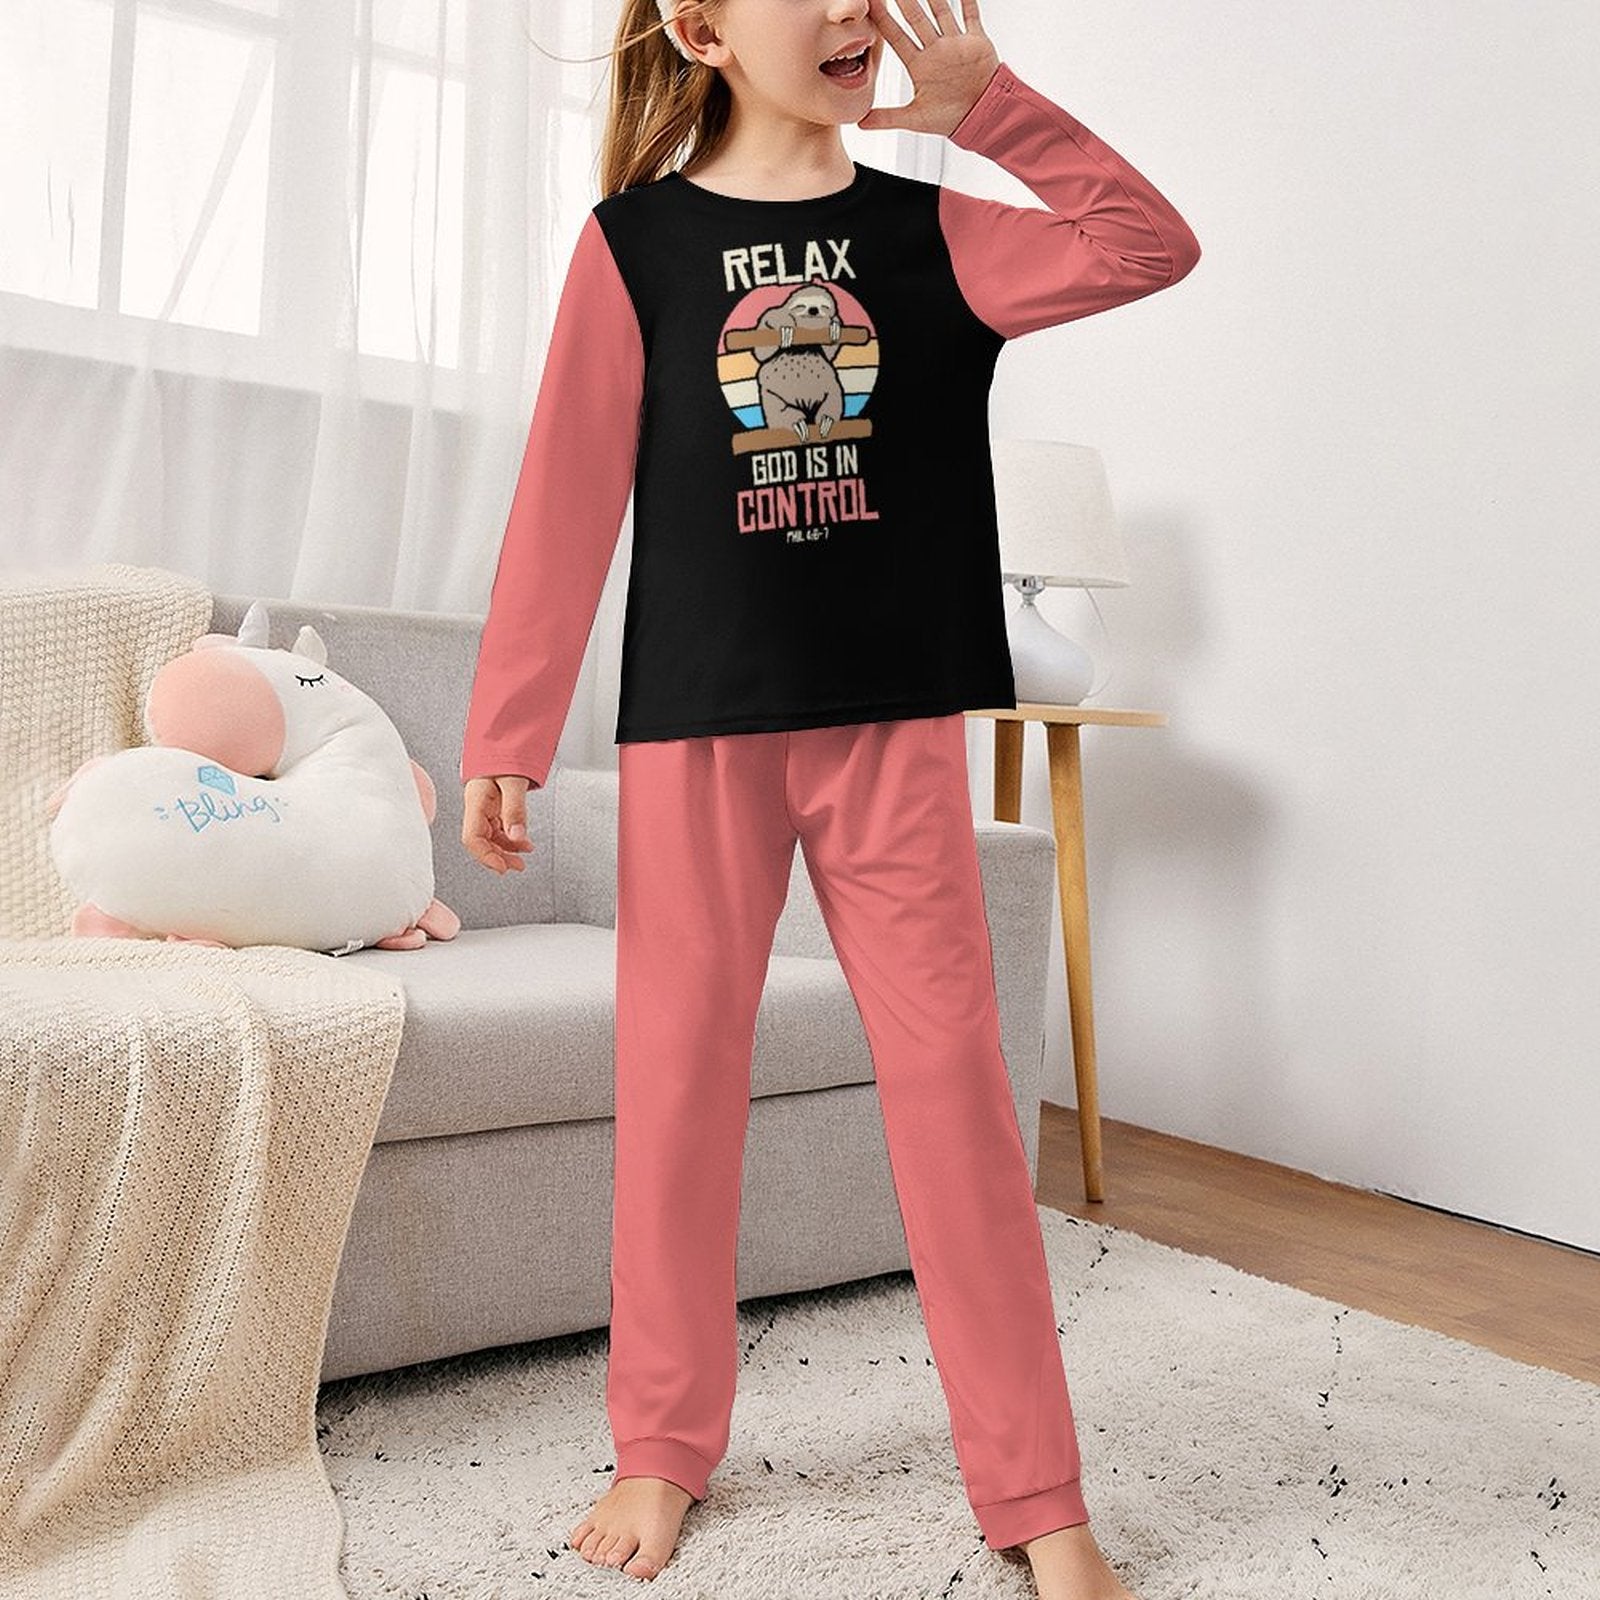 Relax God Is In Control Youth Toddler Christian  Long Sleeve Girls Pajama Set SALE-Personal Design